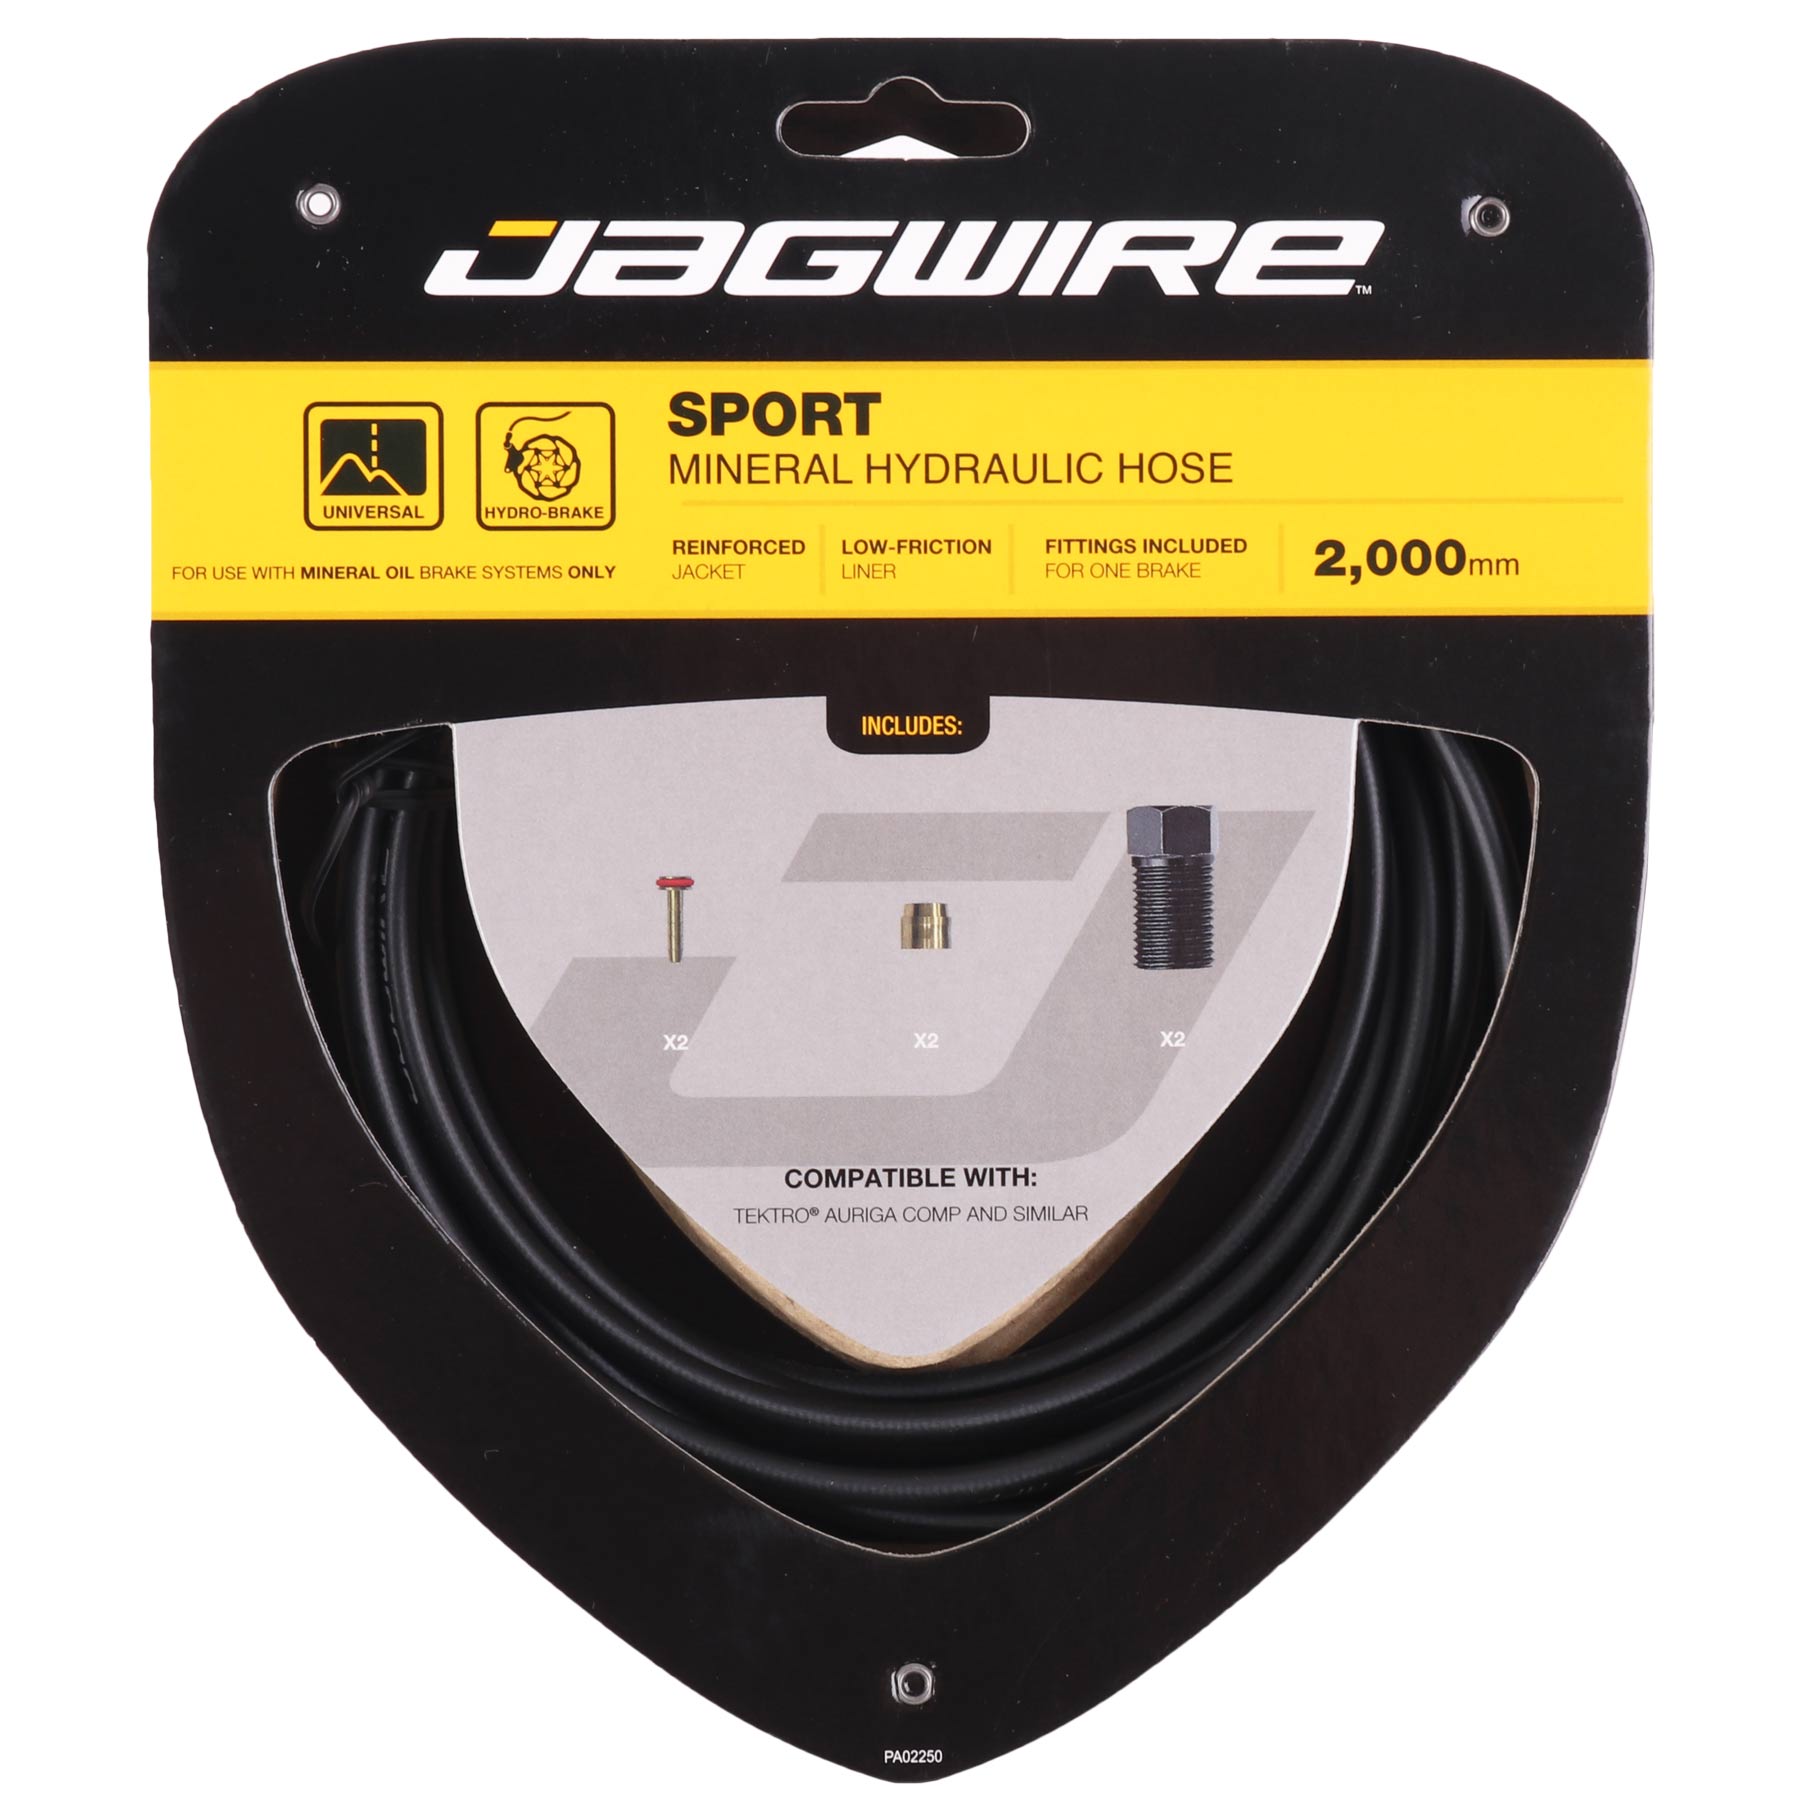 Picture of Jagwire Sport Hydraulic Brake Hose Kit | Mineral Oil - HBKB801 for Tektro® Auriga Comp / Orion 4P HD-M745 / HD-M275/276